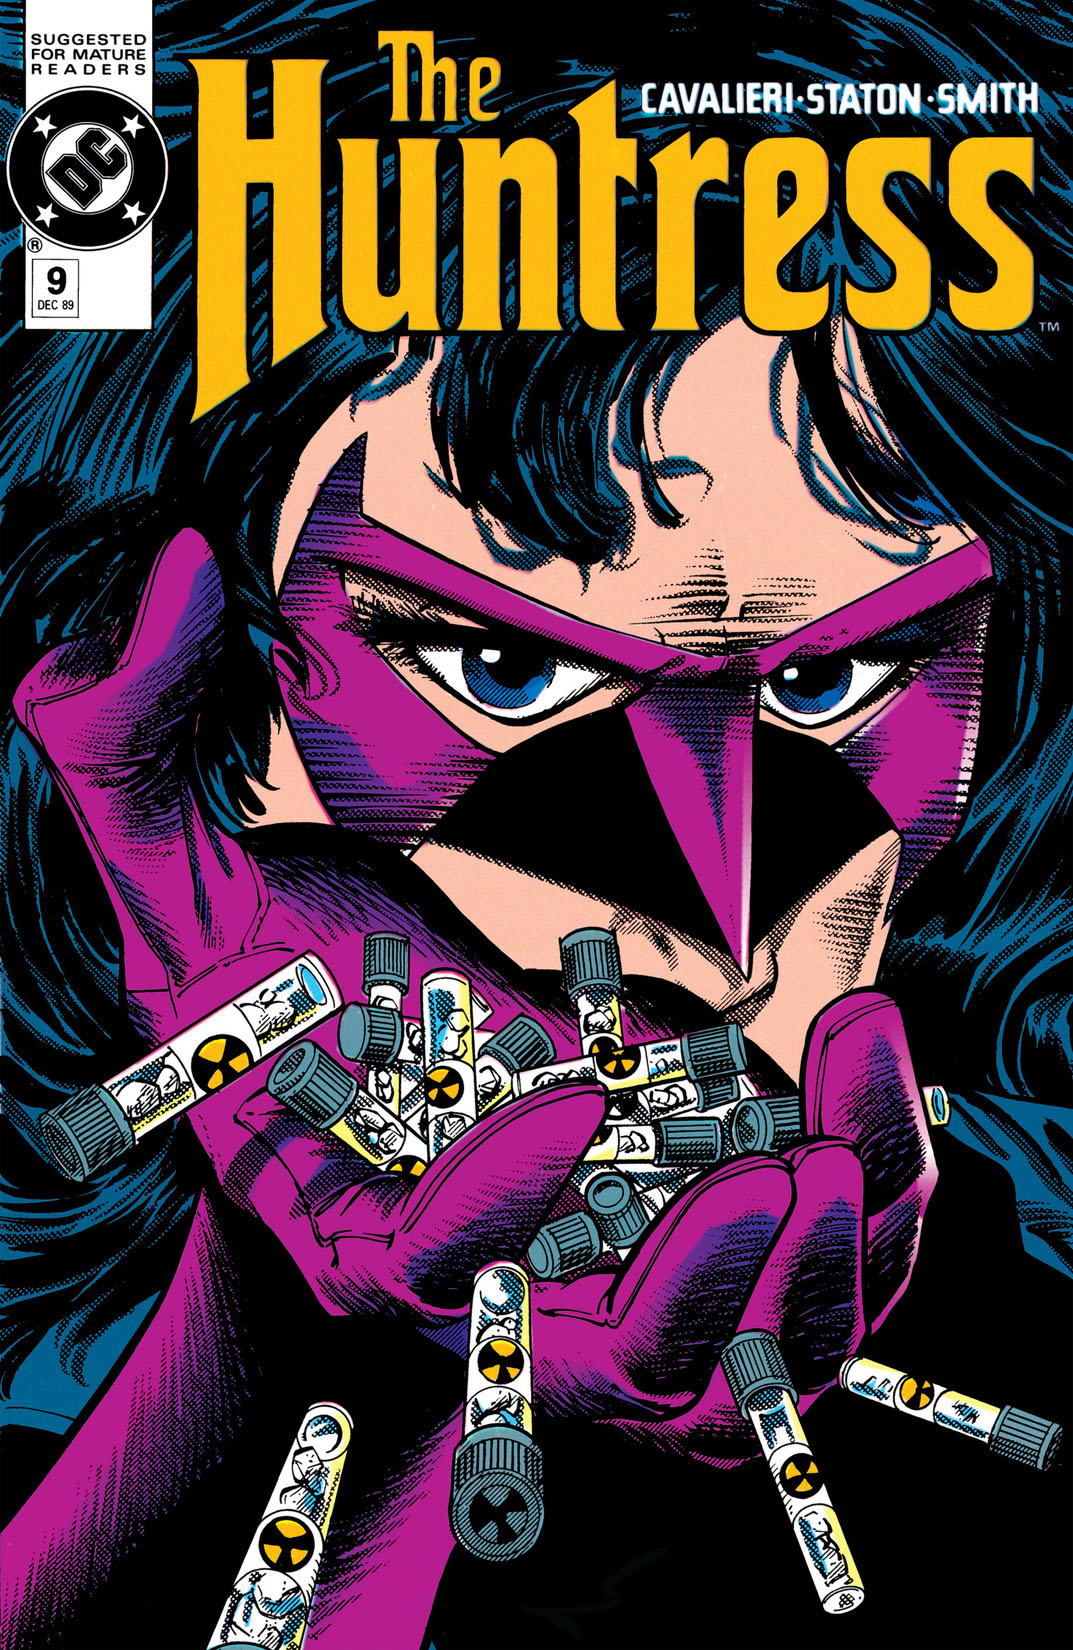 The Huntress (1989-1990) #9 preview images